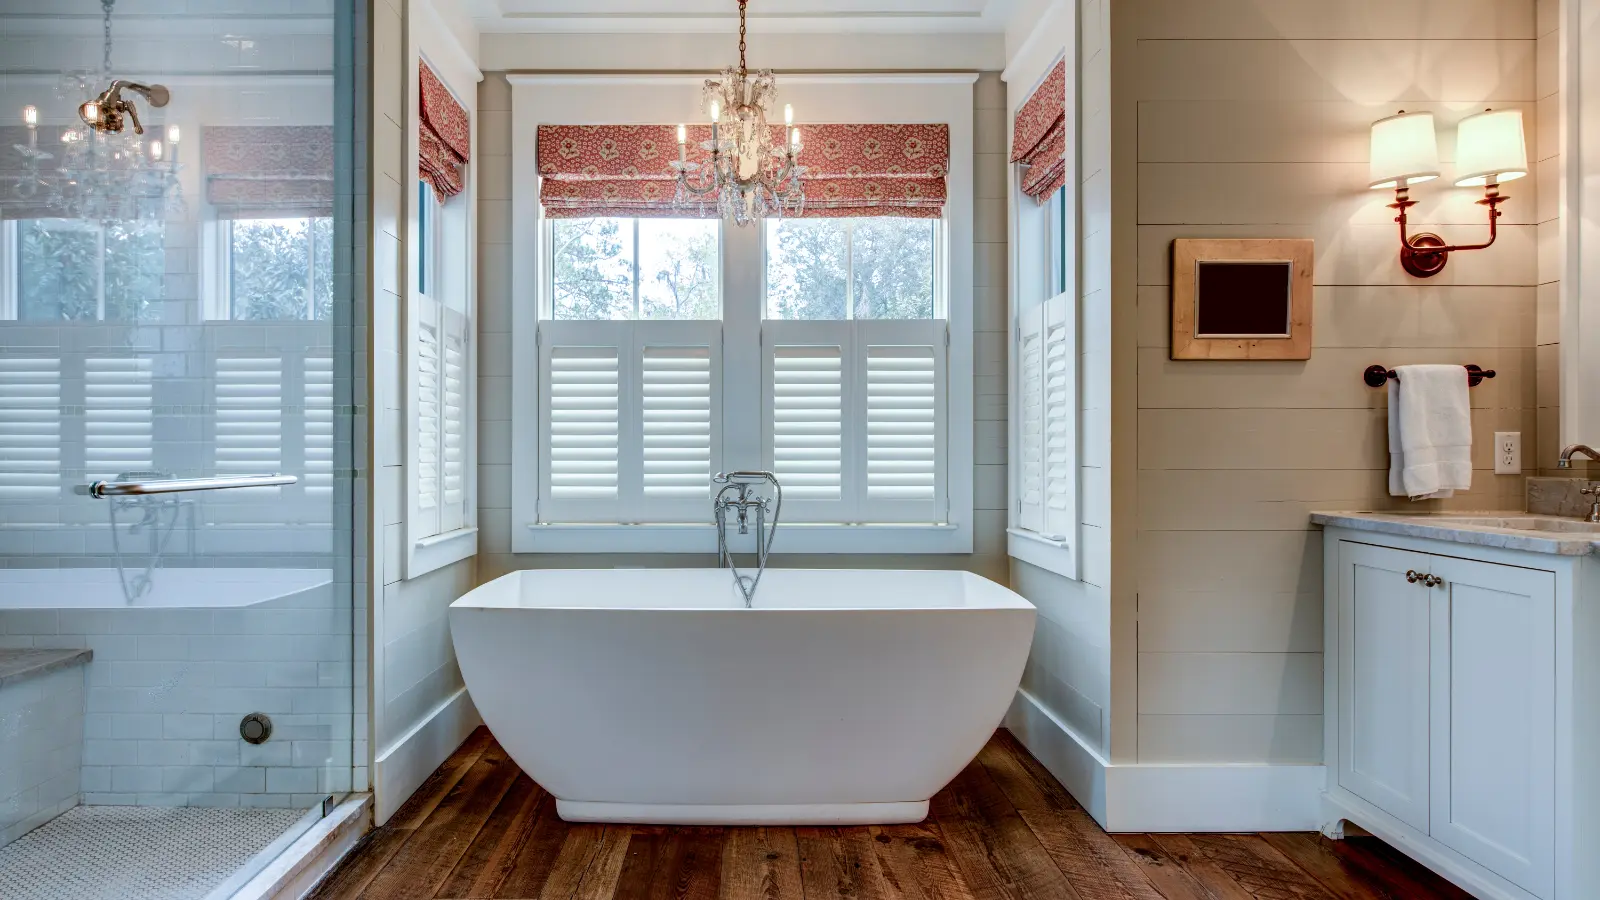 A white bathroom with wooden floors and shutters.